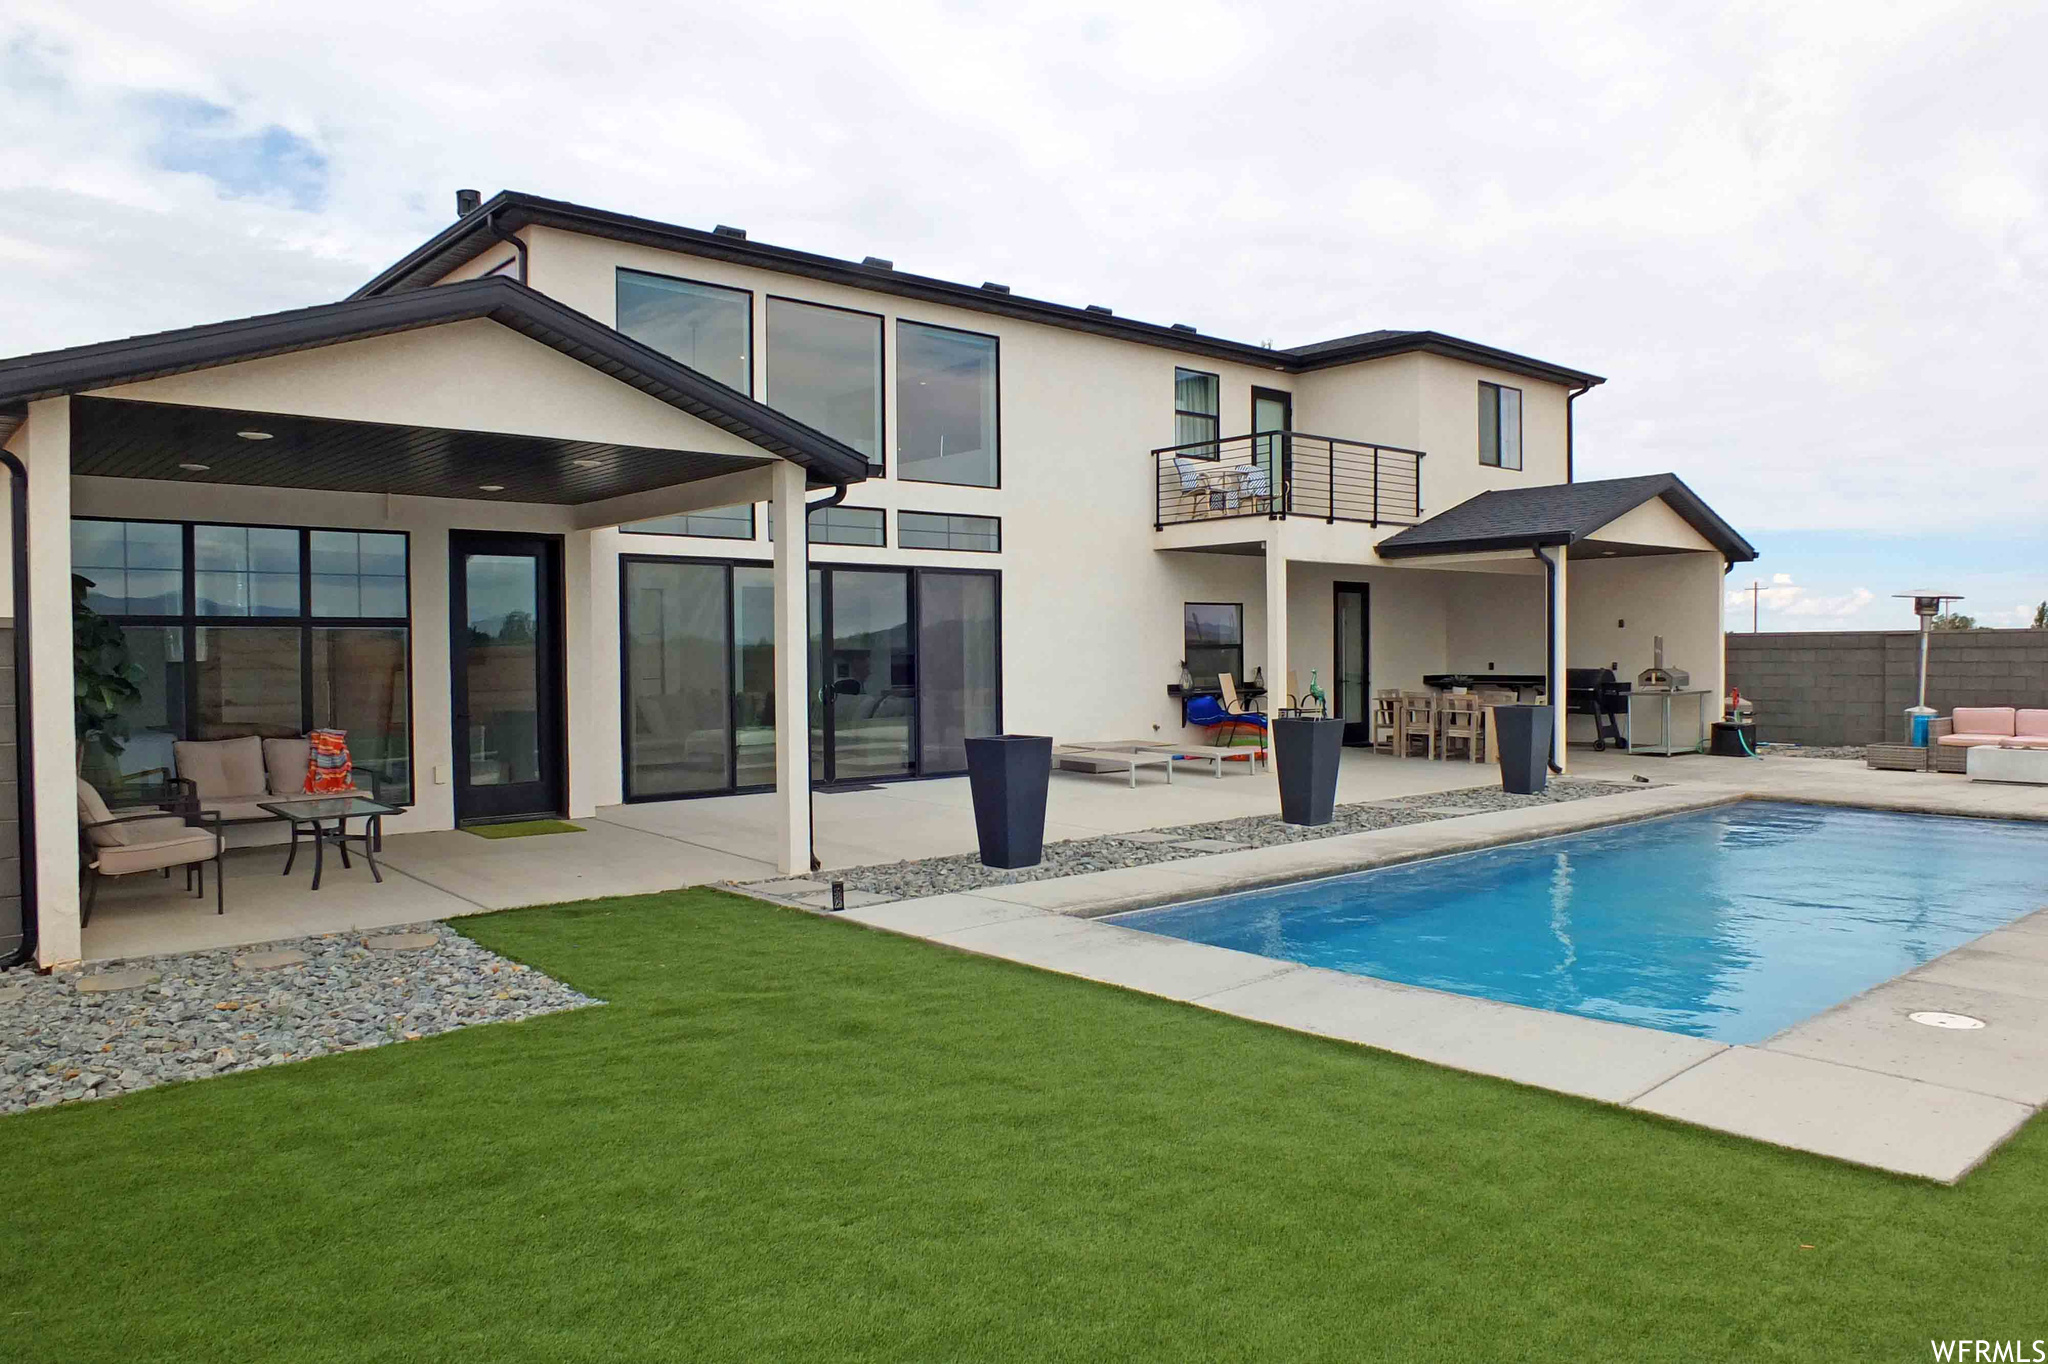 Rear view of house featuring a patio area, an outdoor living space, a fenced in pool, and a balcony